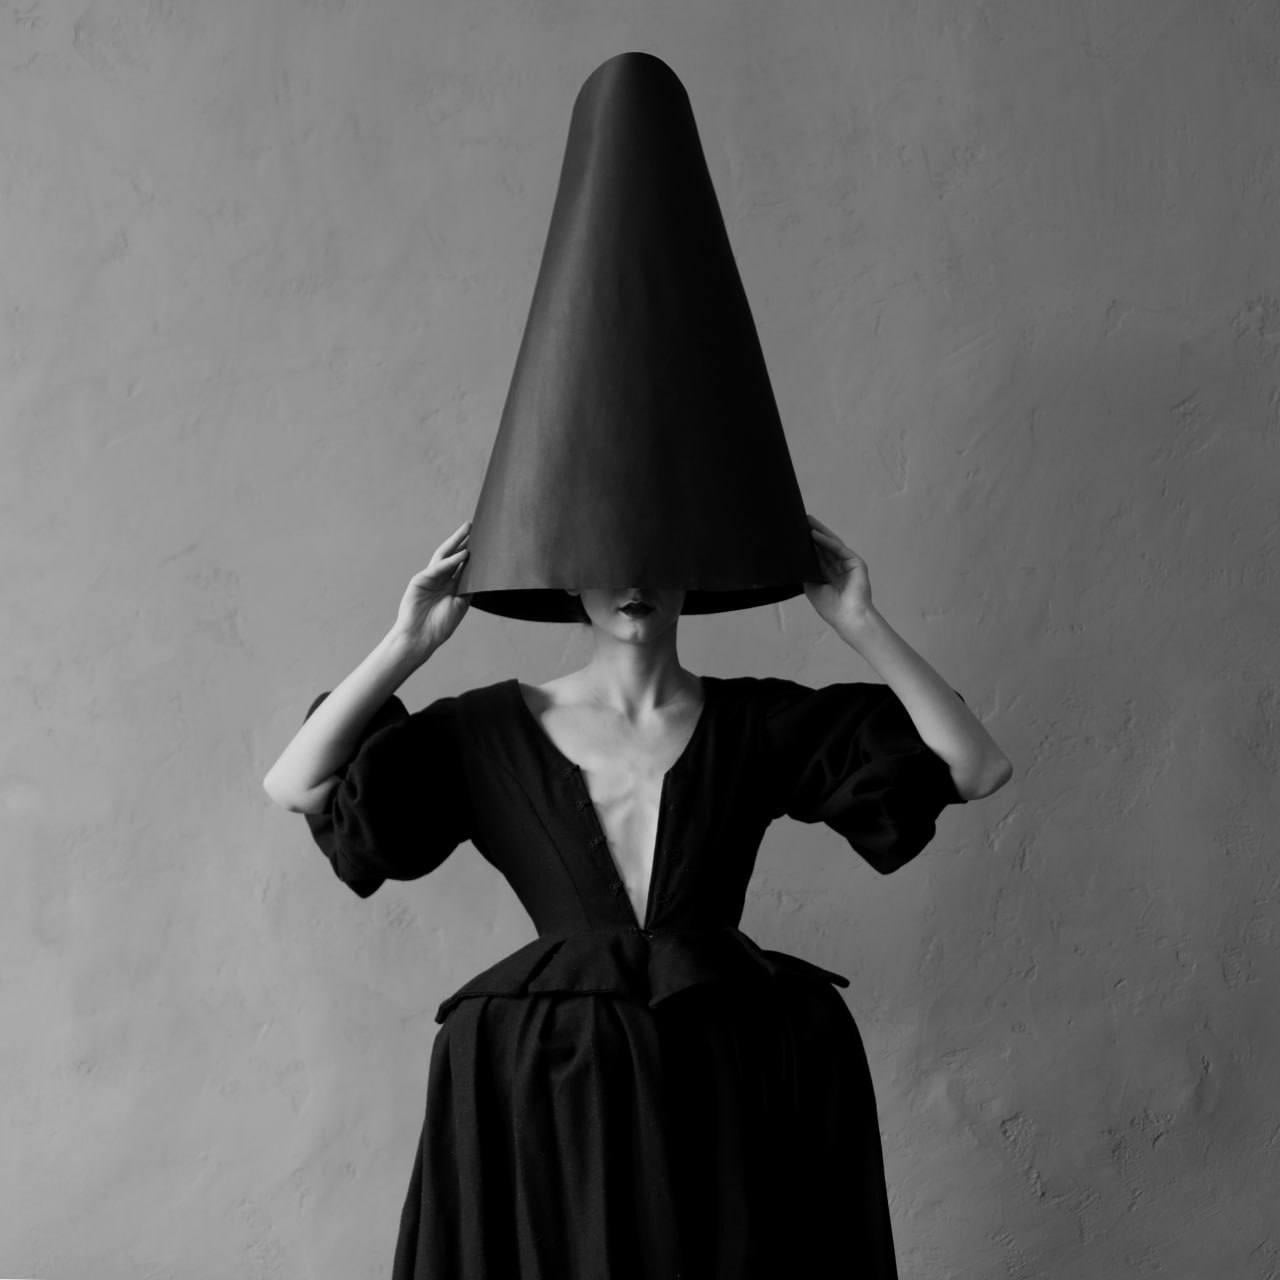 "Invisibility Hat" Photography 31" x 31" in Edition 2/7 by Olha Stepanian